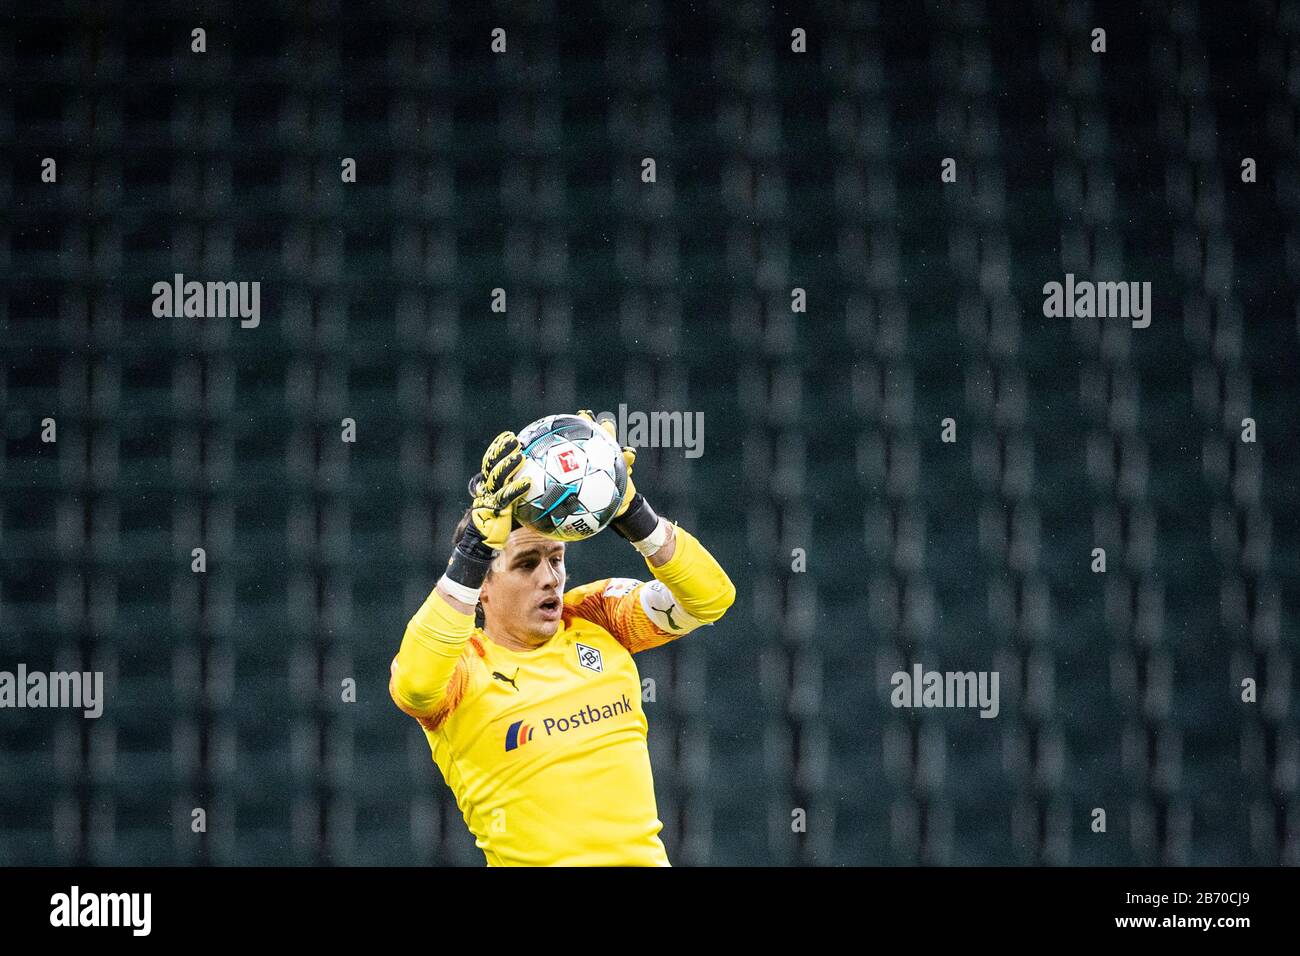 Mönchengladbach, Germany, Borussiapark, 11.03.2020: Goalkeeper Yann Sommer of Bor. Moenchengladbach catches the ball in front of an empty stadium with Stock Photo